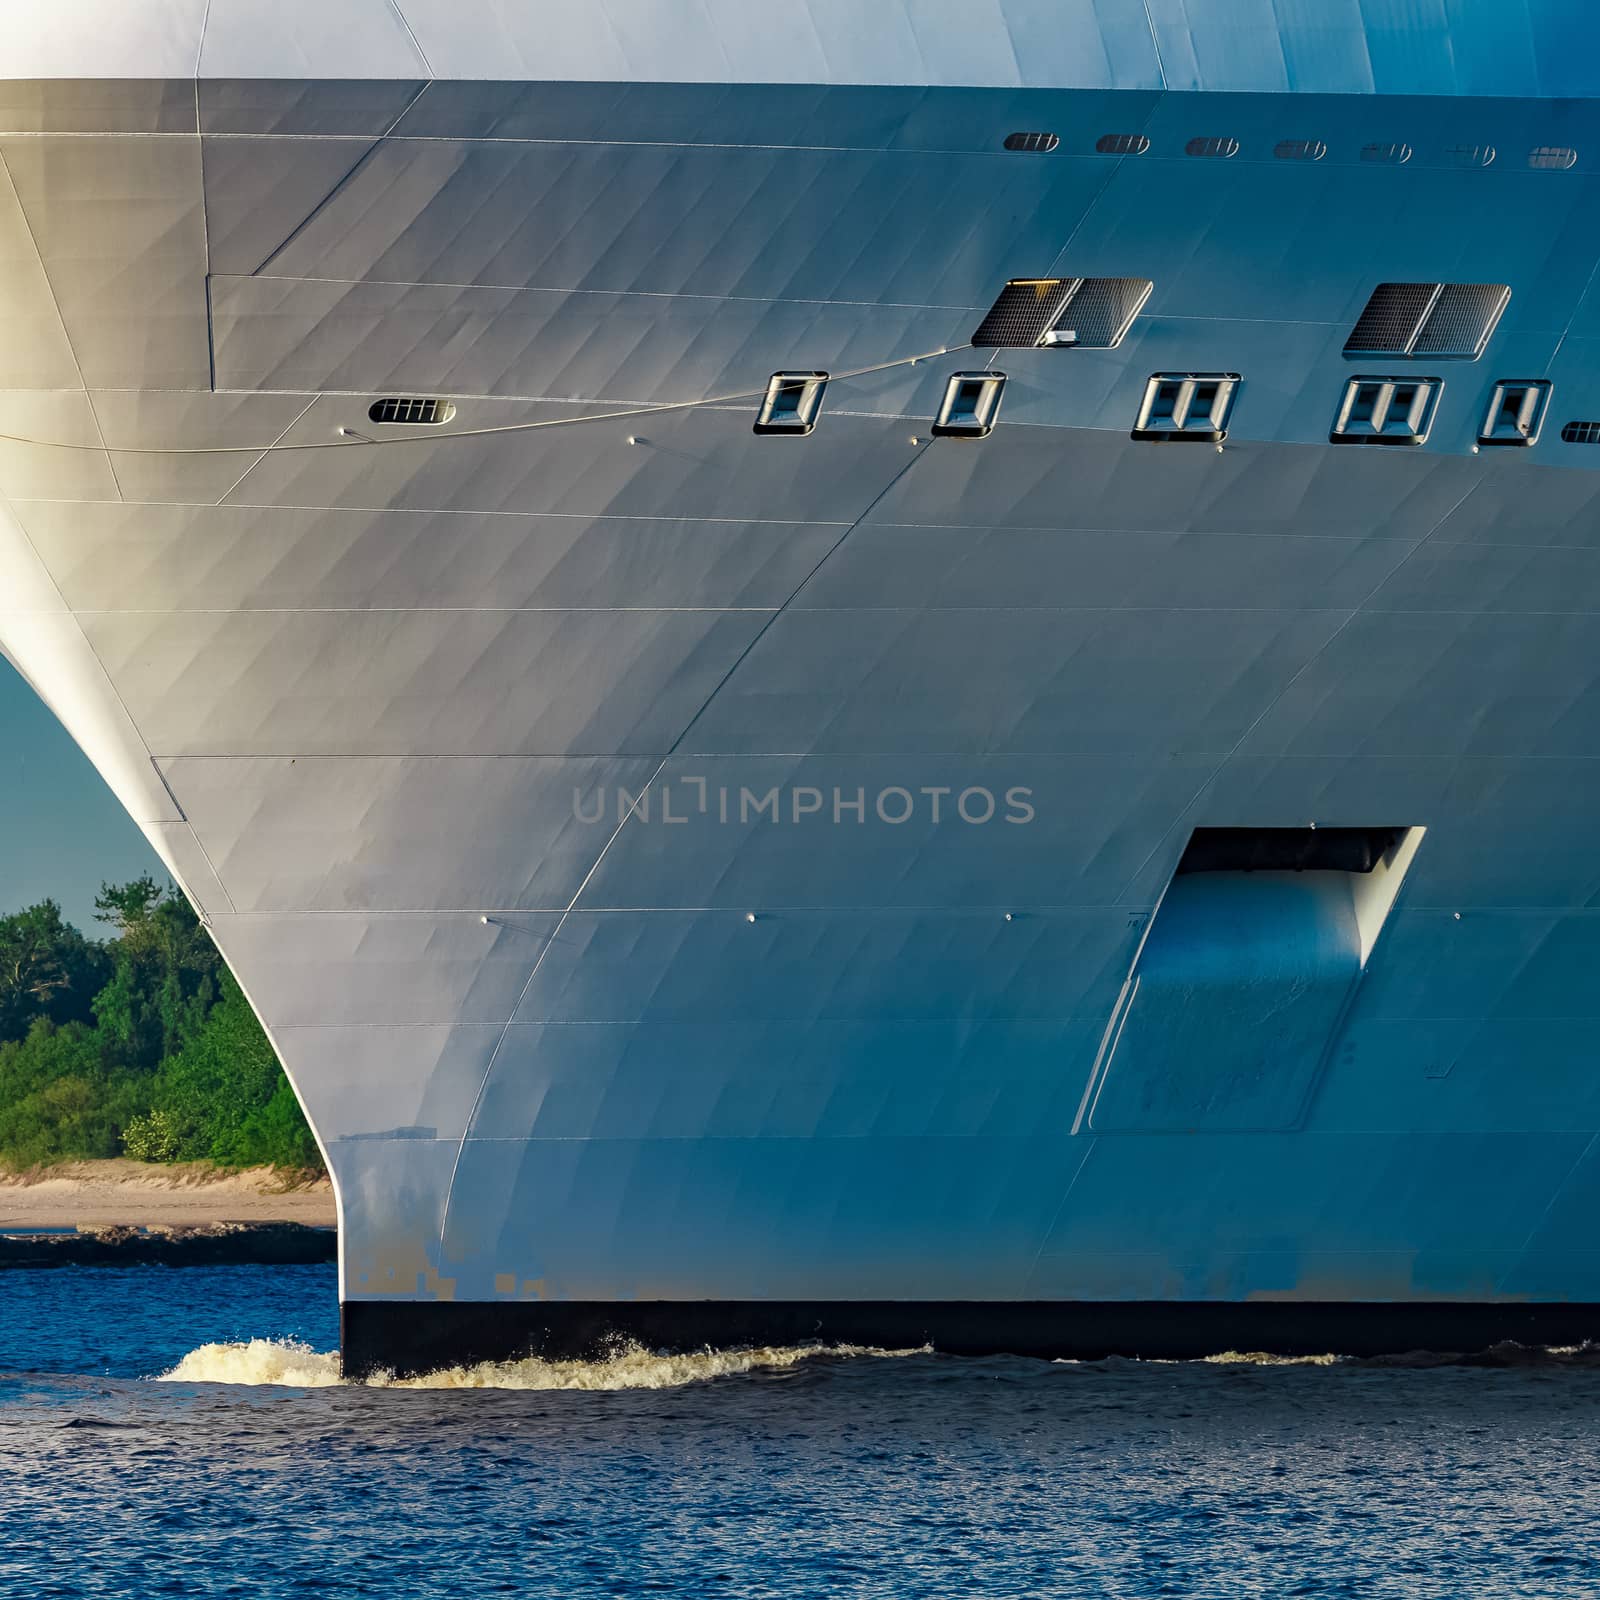 Giant brand new cruise liner by sengnsp